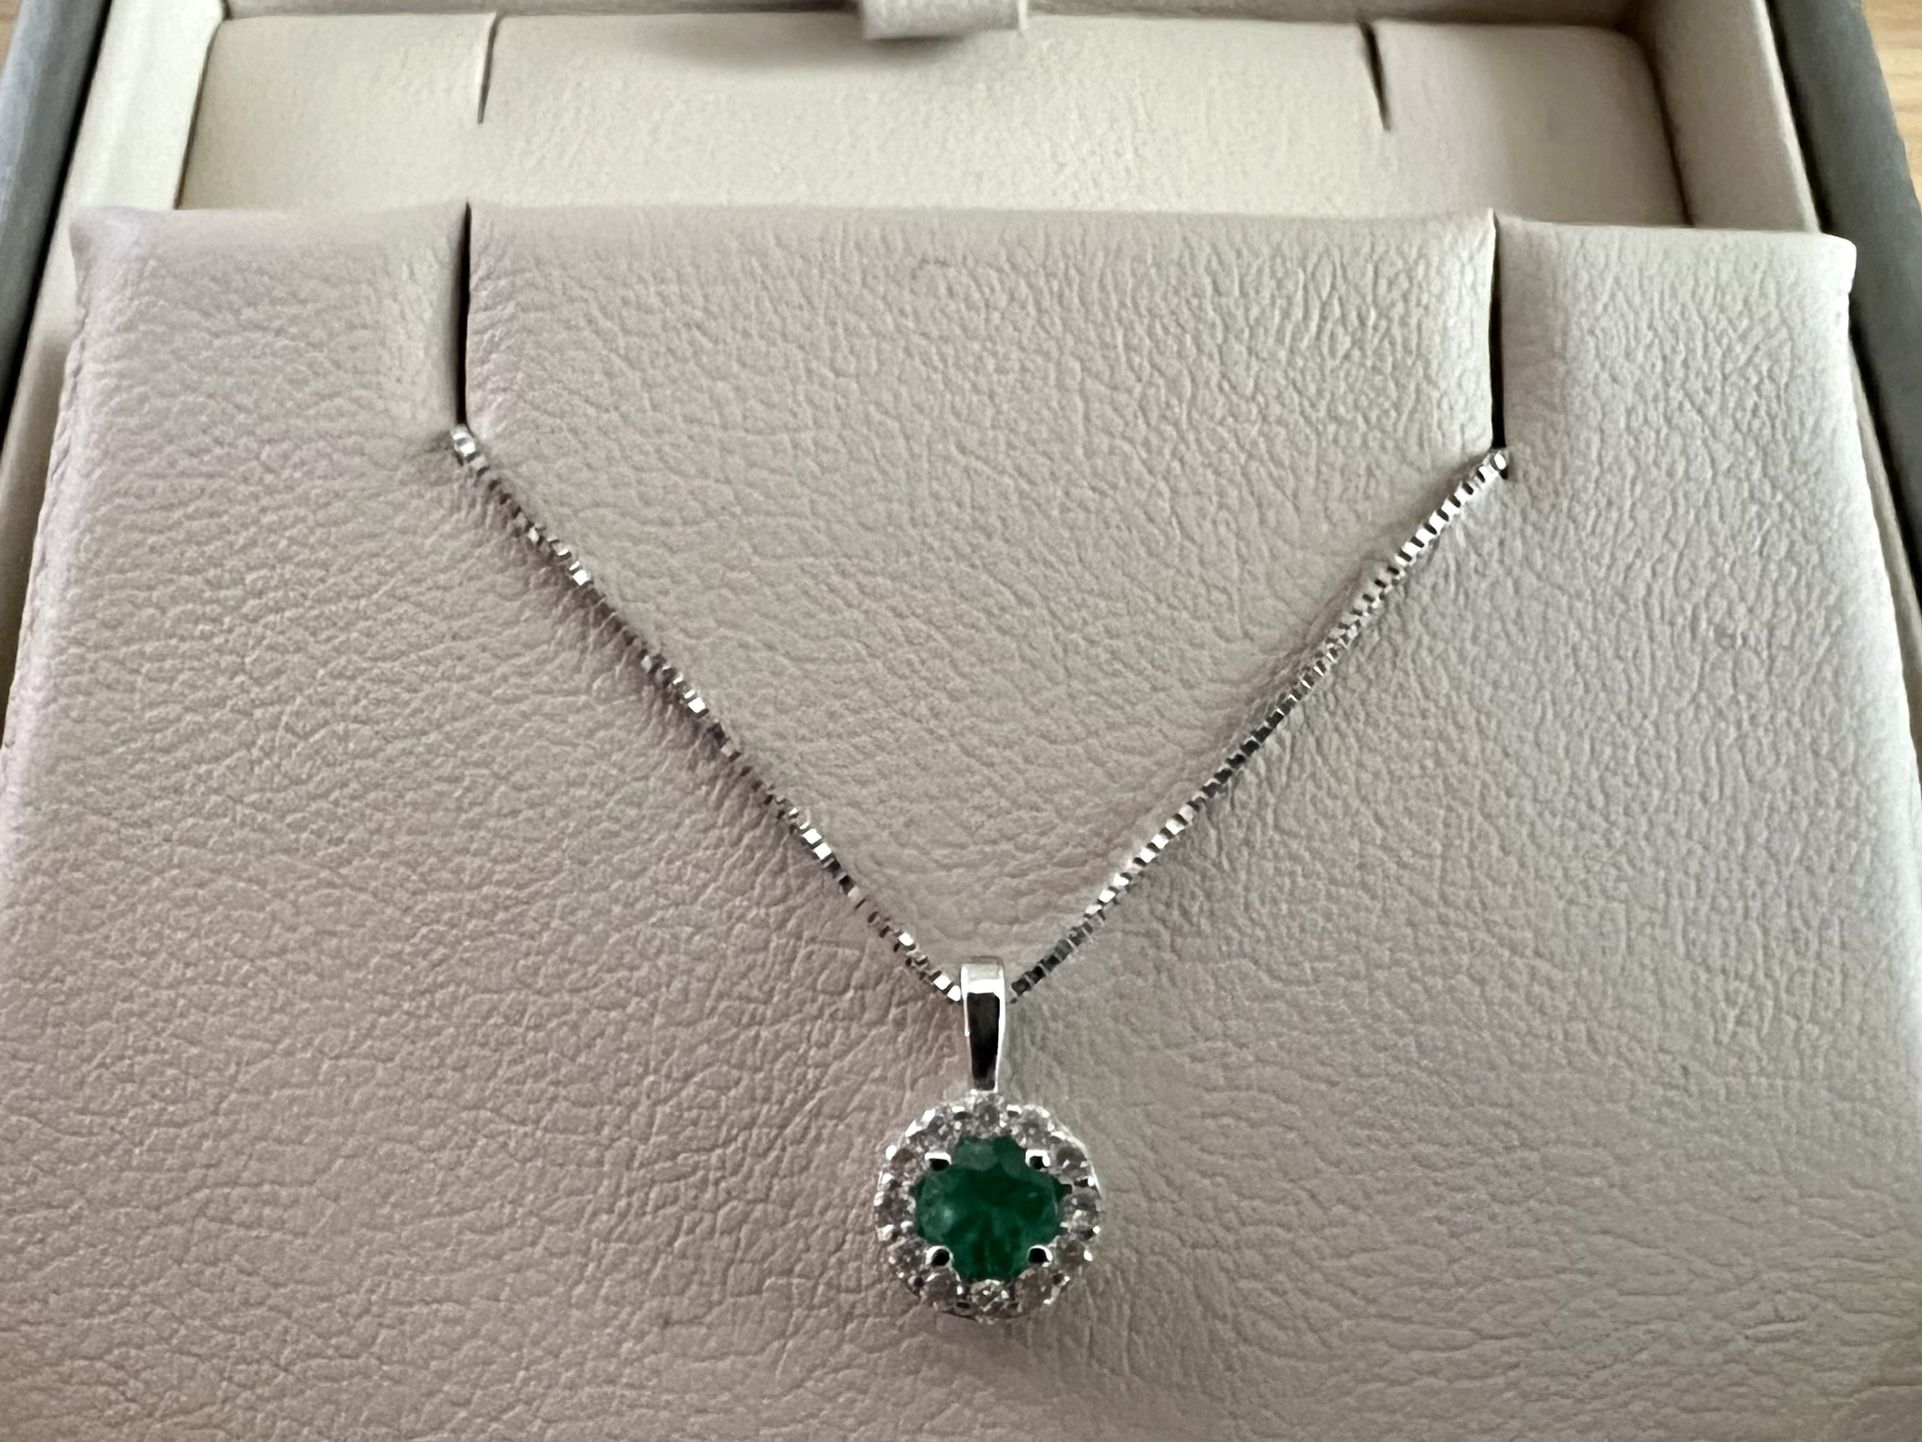 Green Emerald And Diamond Earrings And Necklace 